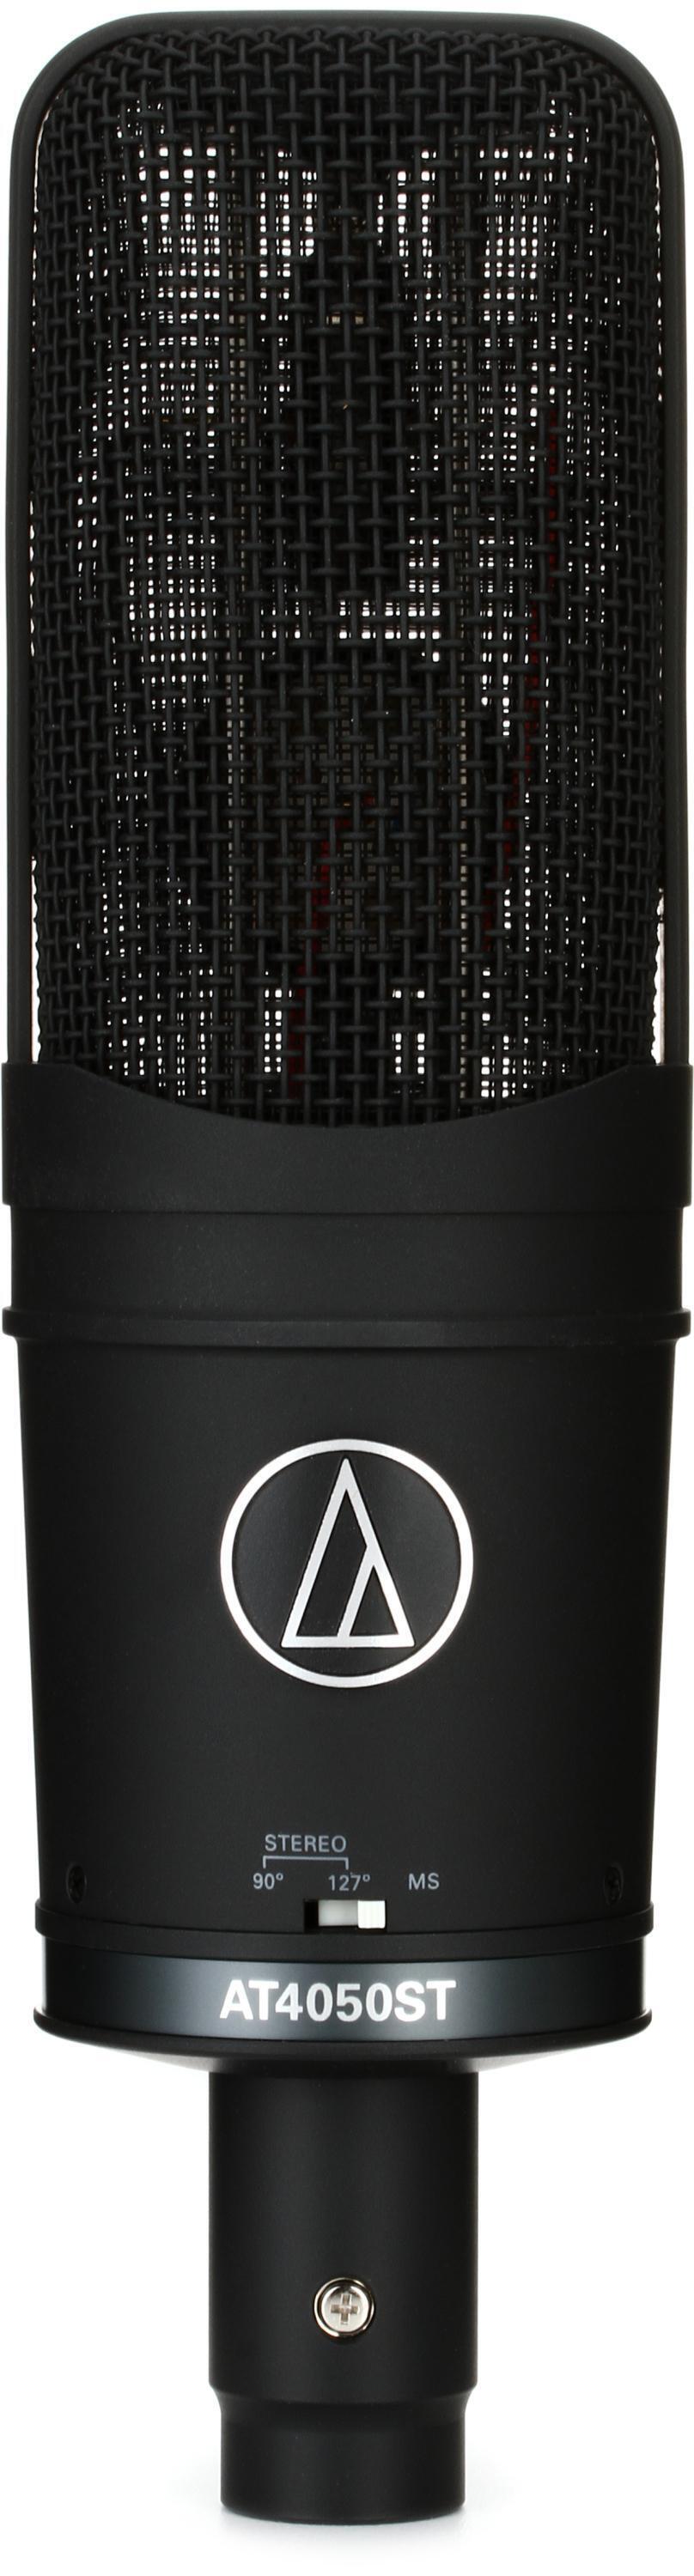 Audio-Technica AT4050ST Stereo Large-diaphragm Condenser Microphone